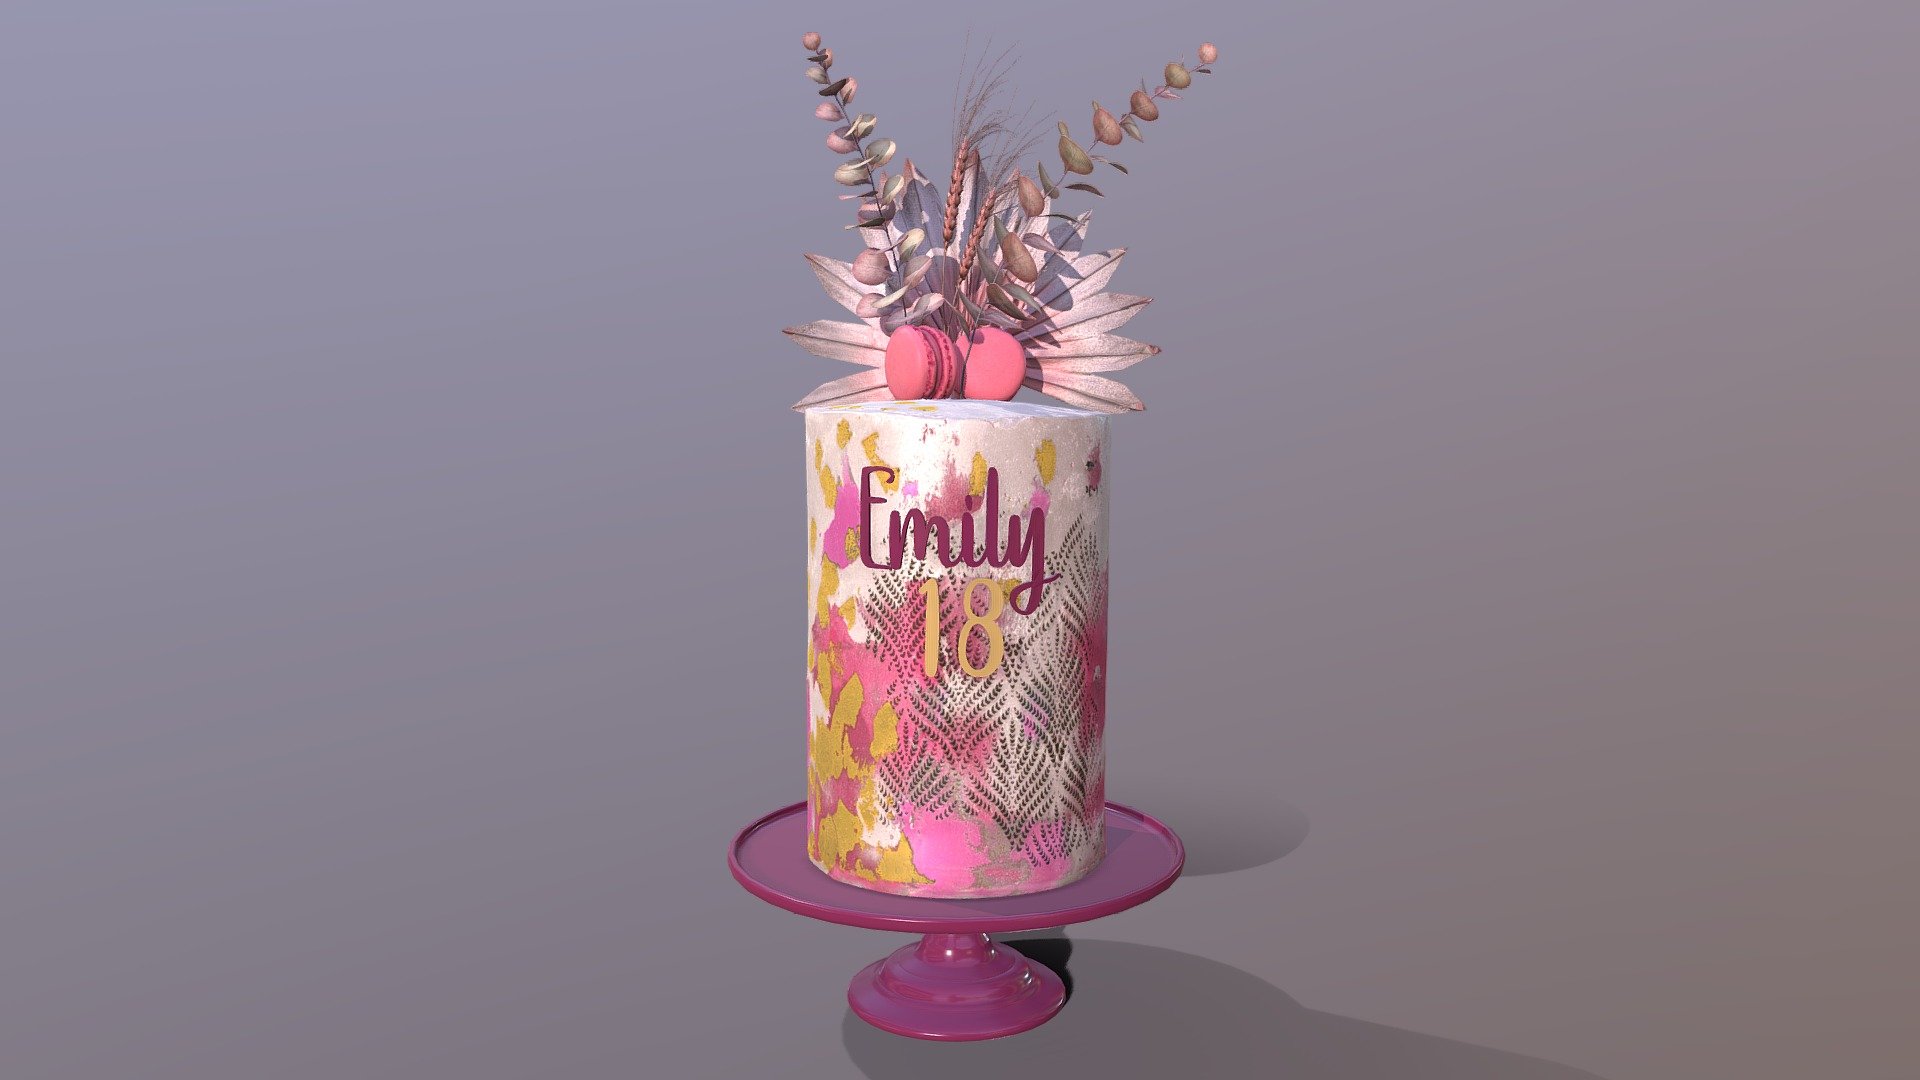 3D scan of a Luxury Golden Pink Buttercream Cake on the elegant mosser stand which is made by CAKESBURG Online Premium Cake Shop in UK. 

This 3D cake can be personalised with any text and colour you want. Please contact us.

You can also order real cake from this link: https://cakesburg.co.uk/products/luxury-buttercream-cake-06?_pos=1&amp;_sid=27f107744&amp;_ss=r

Cake Textures - 4096*4096px PBR photoscan-based materials (Base Color, Normal, Roughness, Specular, AO)

Macarone textures - 4096*4096px PBR photoscan-based materials (Base Color, Normal, Roughness, Specular, AO)

Palm, Eucalyptus and Wheat Textures - 4096*4096px PBR photoscan-based materials (Base Color, Normal, Roughness, Specular, AO) - Personalised Luxury Golden Pink Buttercream Cake - Buy Royalty Free 3D model by Cakesburg Premium 3D Cake Shop (@Viscom_Cakesburg) 3d model